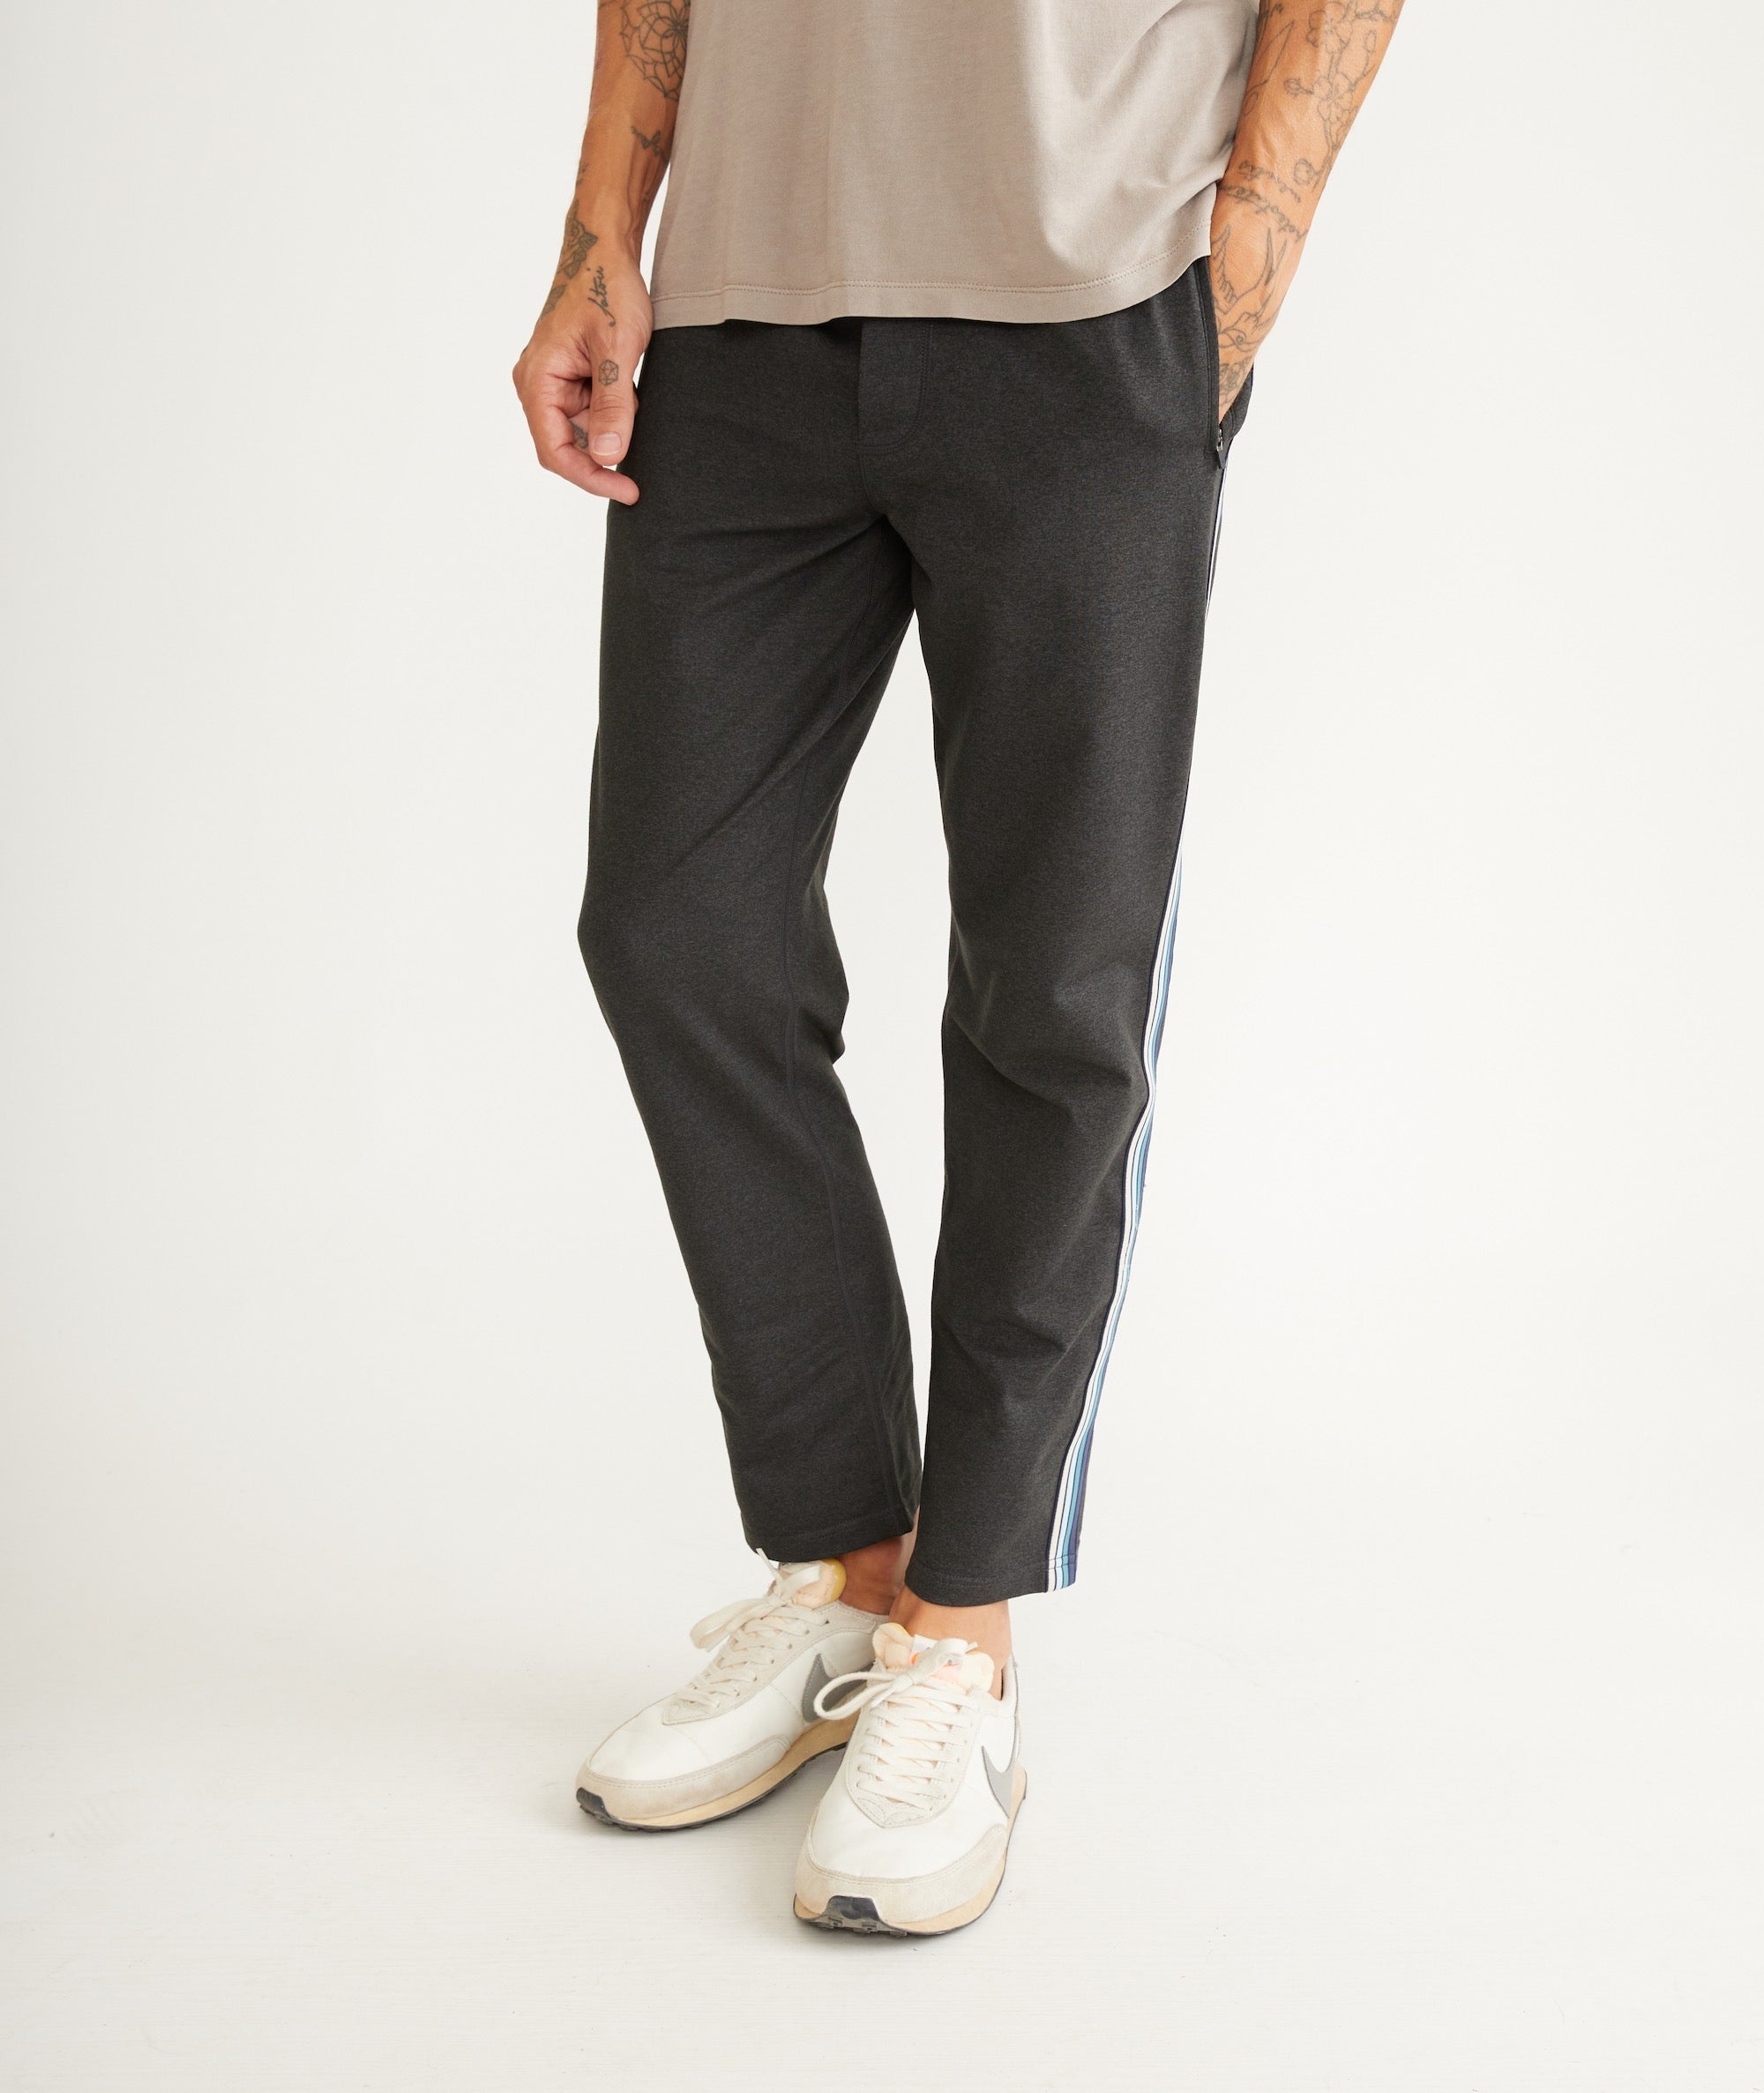 Buy Black Trousers & Pants for Men by ADIDAS Online | Ajio.com